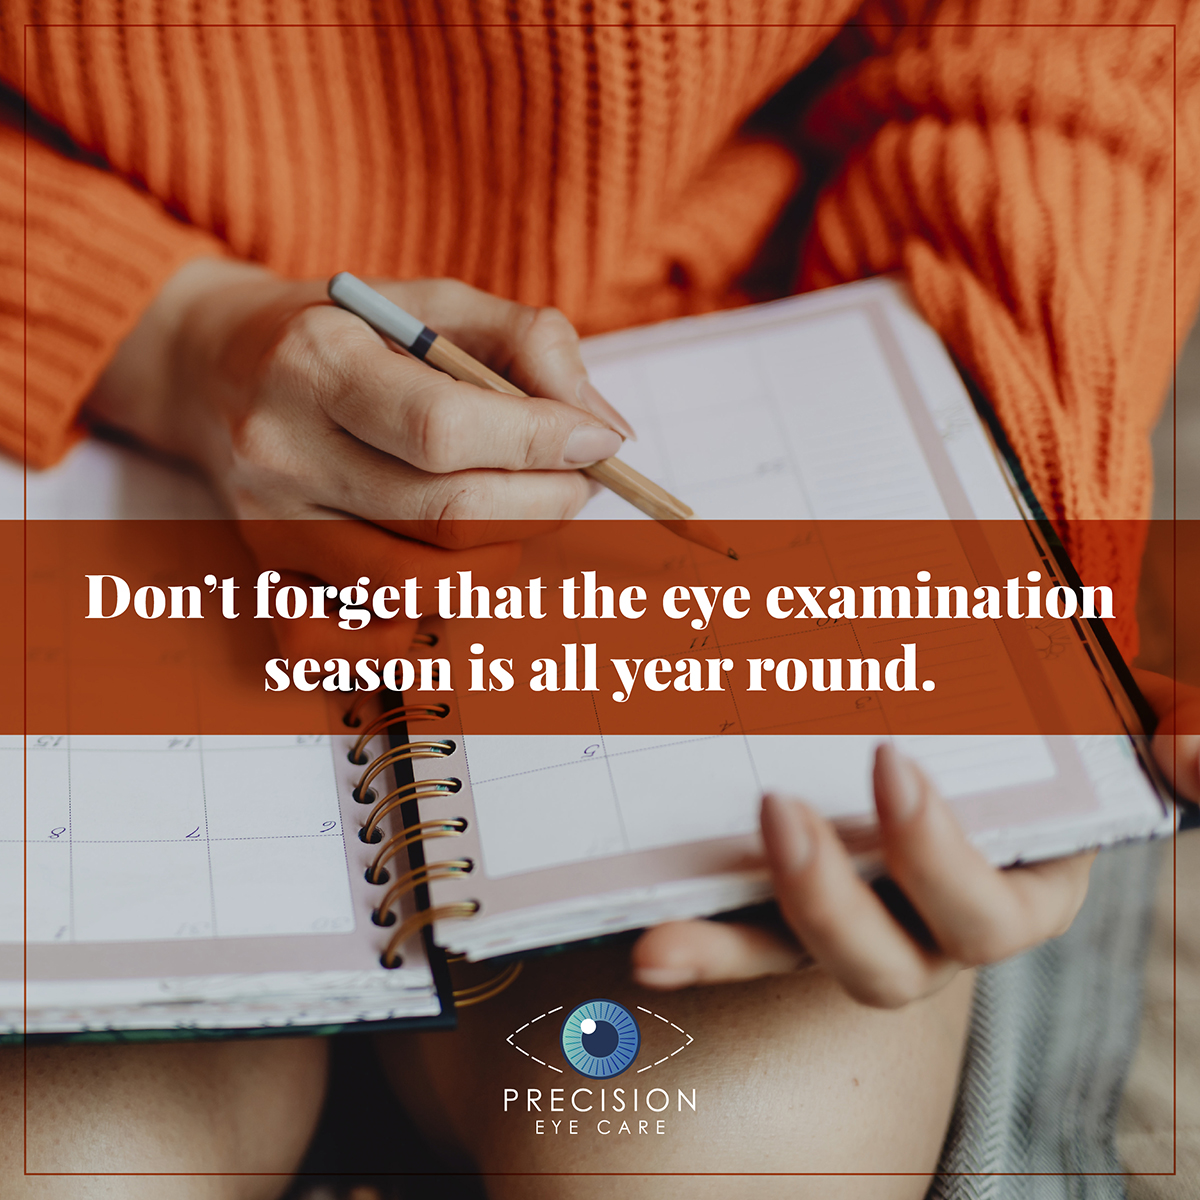 Don’t forget that the eye examination season is all year round.